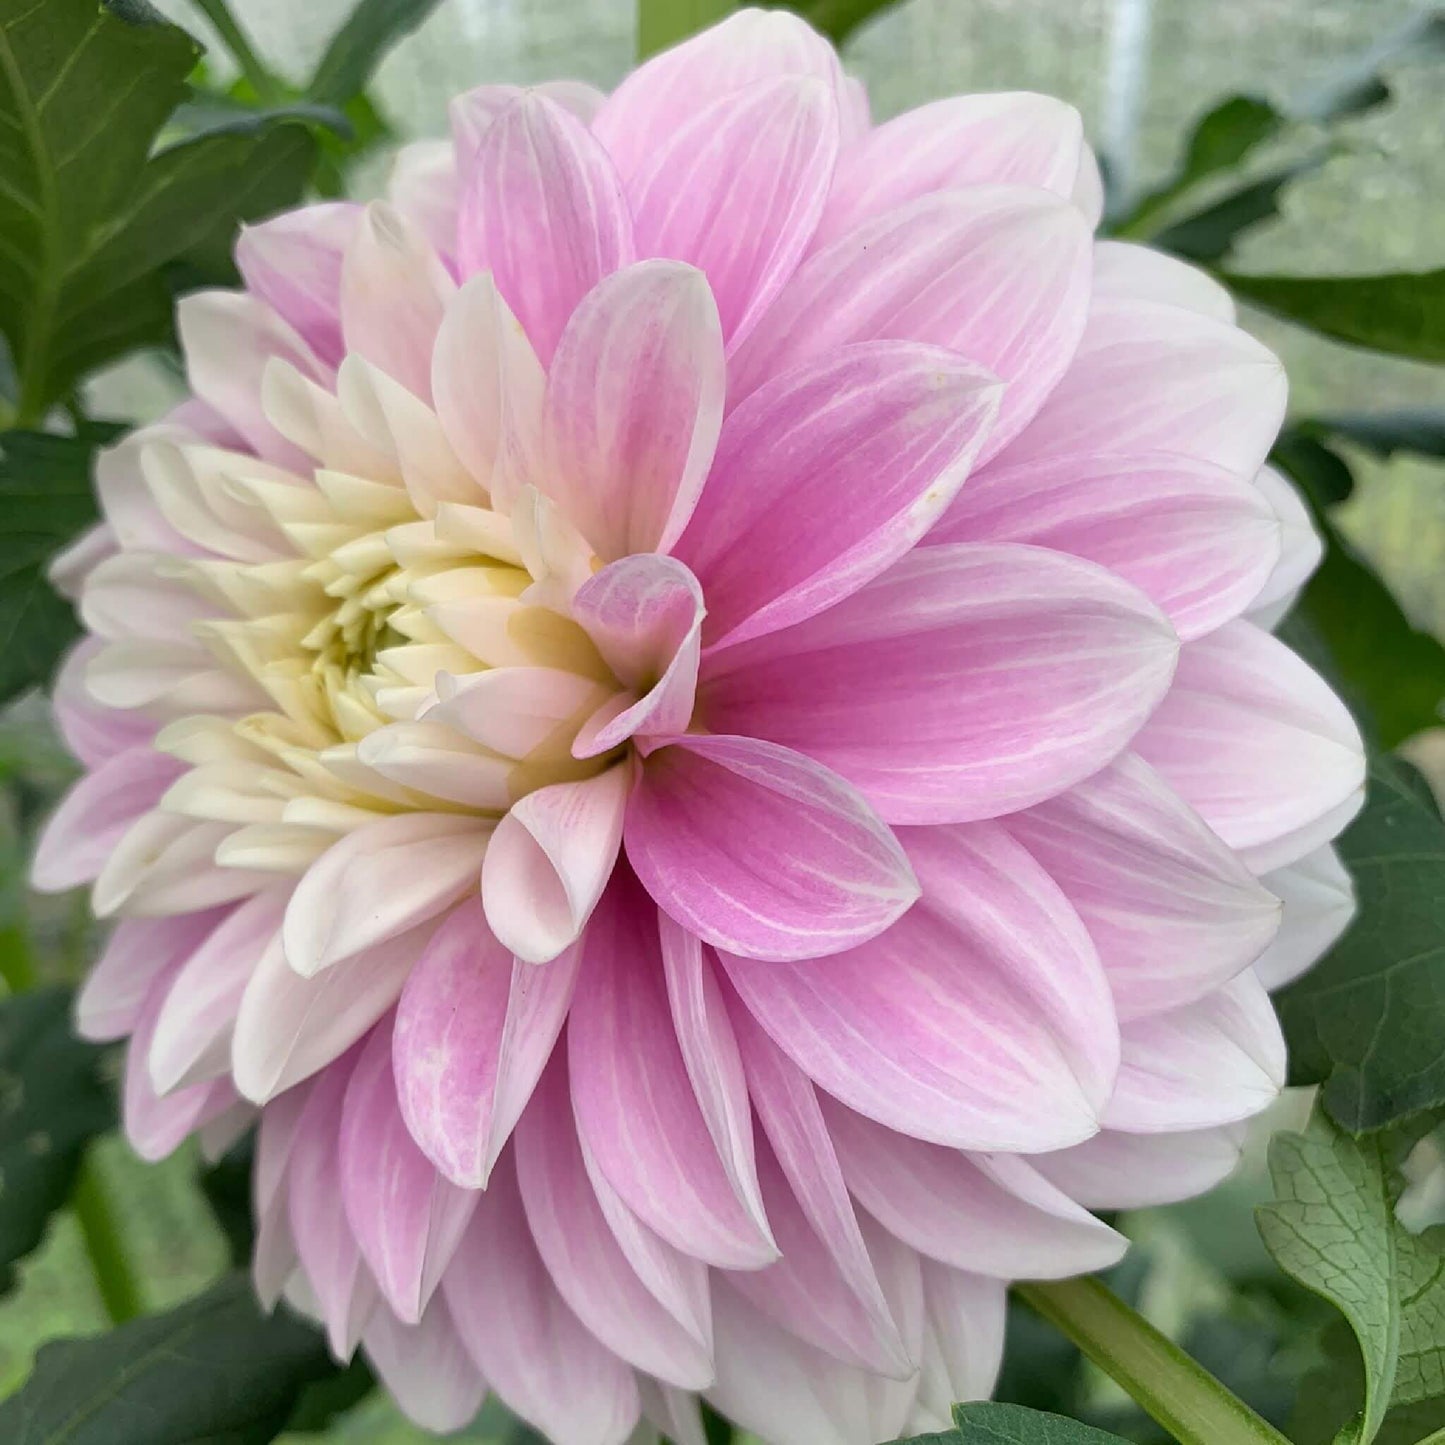 Coseytown Kay dahlia rooted cuttings for sale